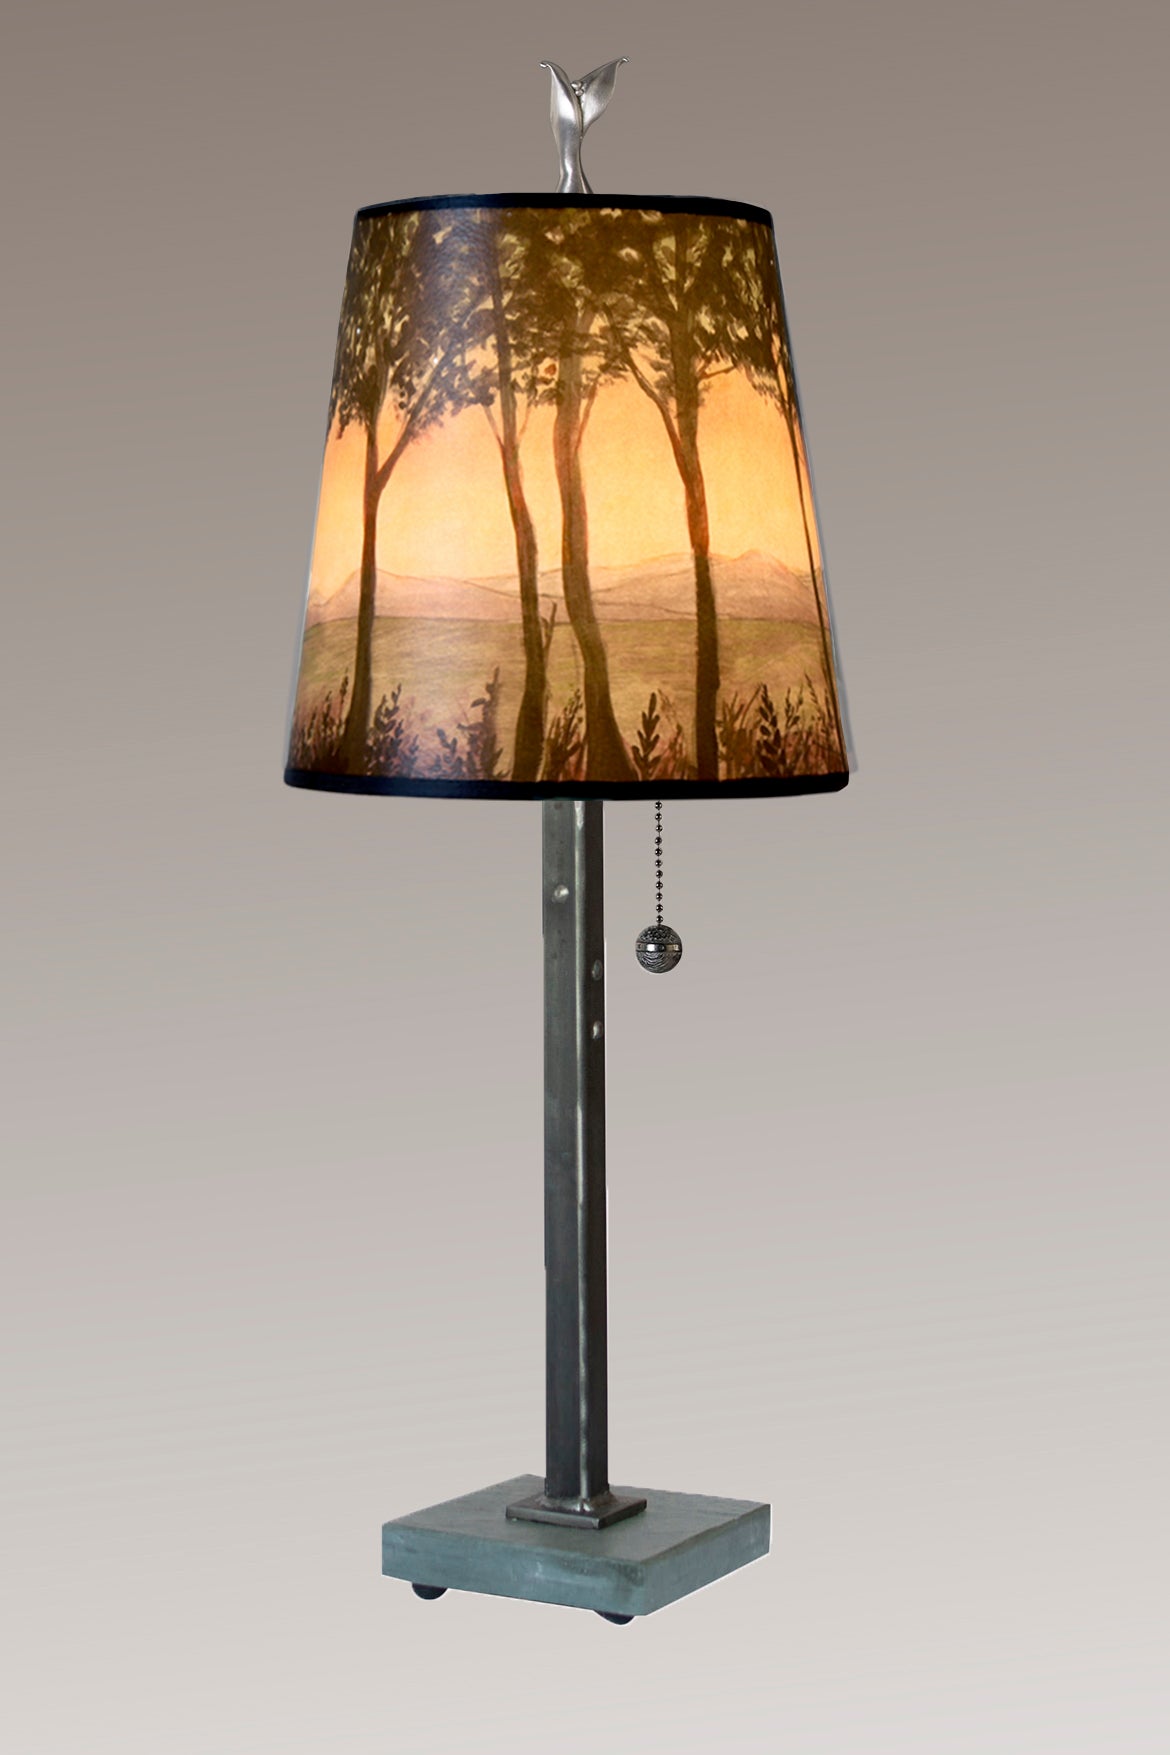 Janna Ugone & Co Table Lamps Steel Table Lamp with Small Drum Shade in Dawn